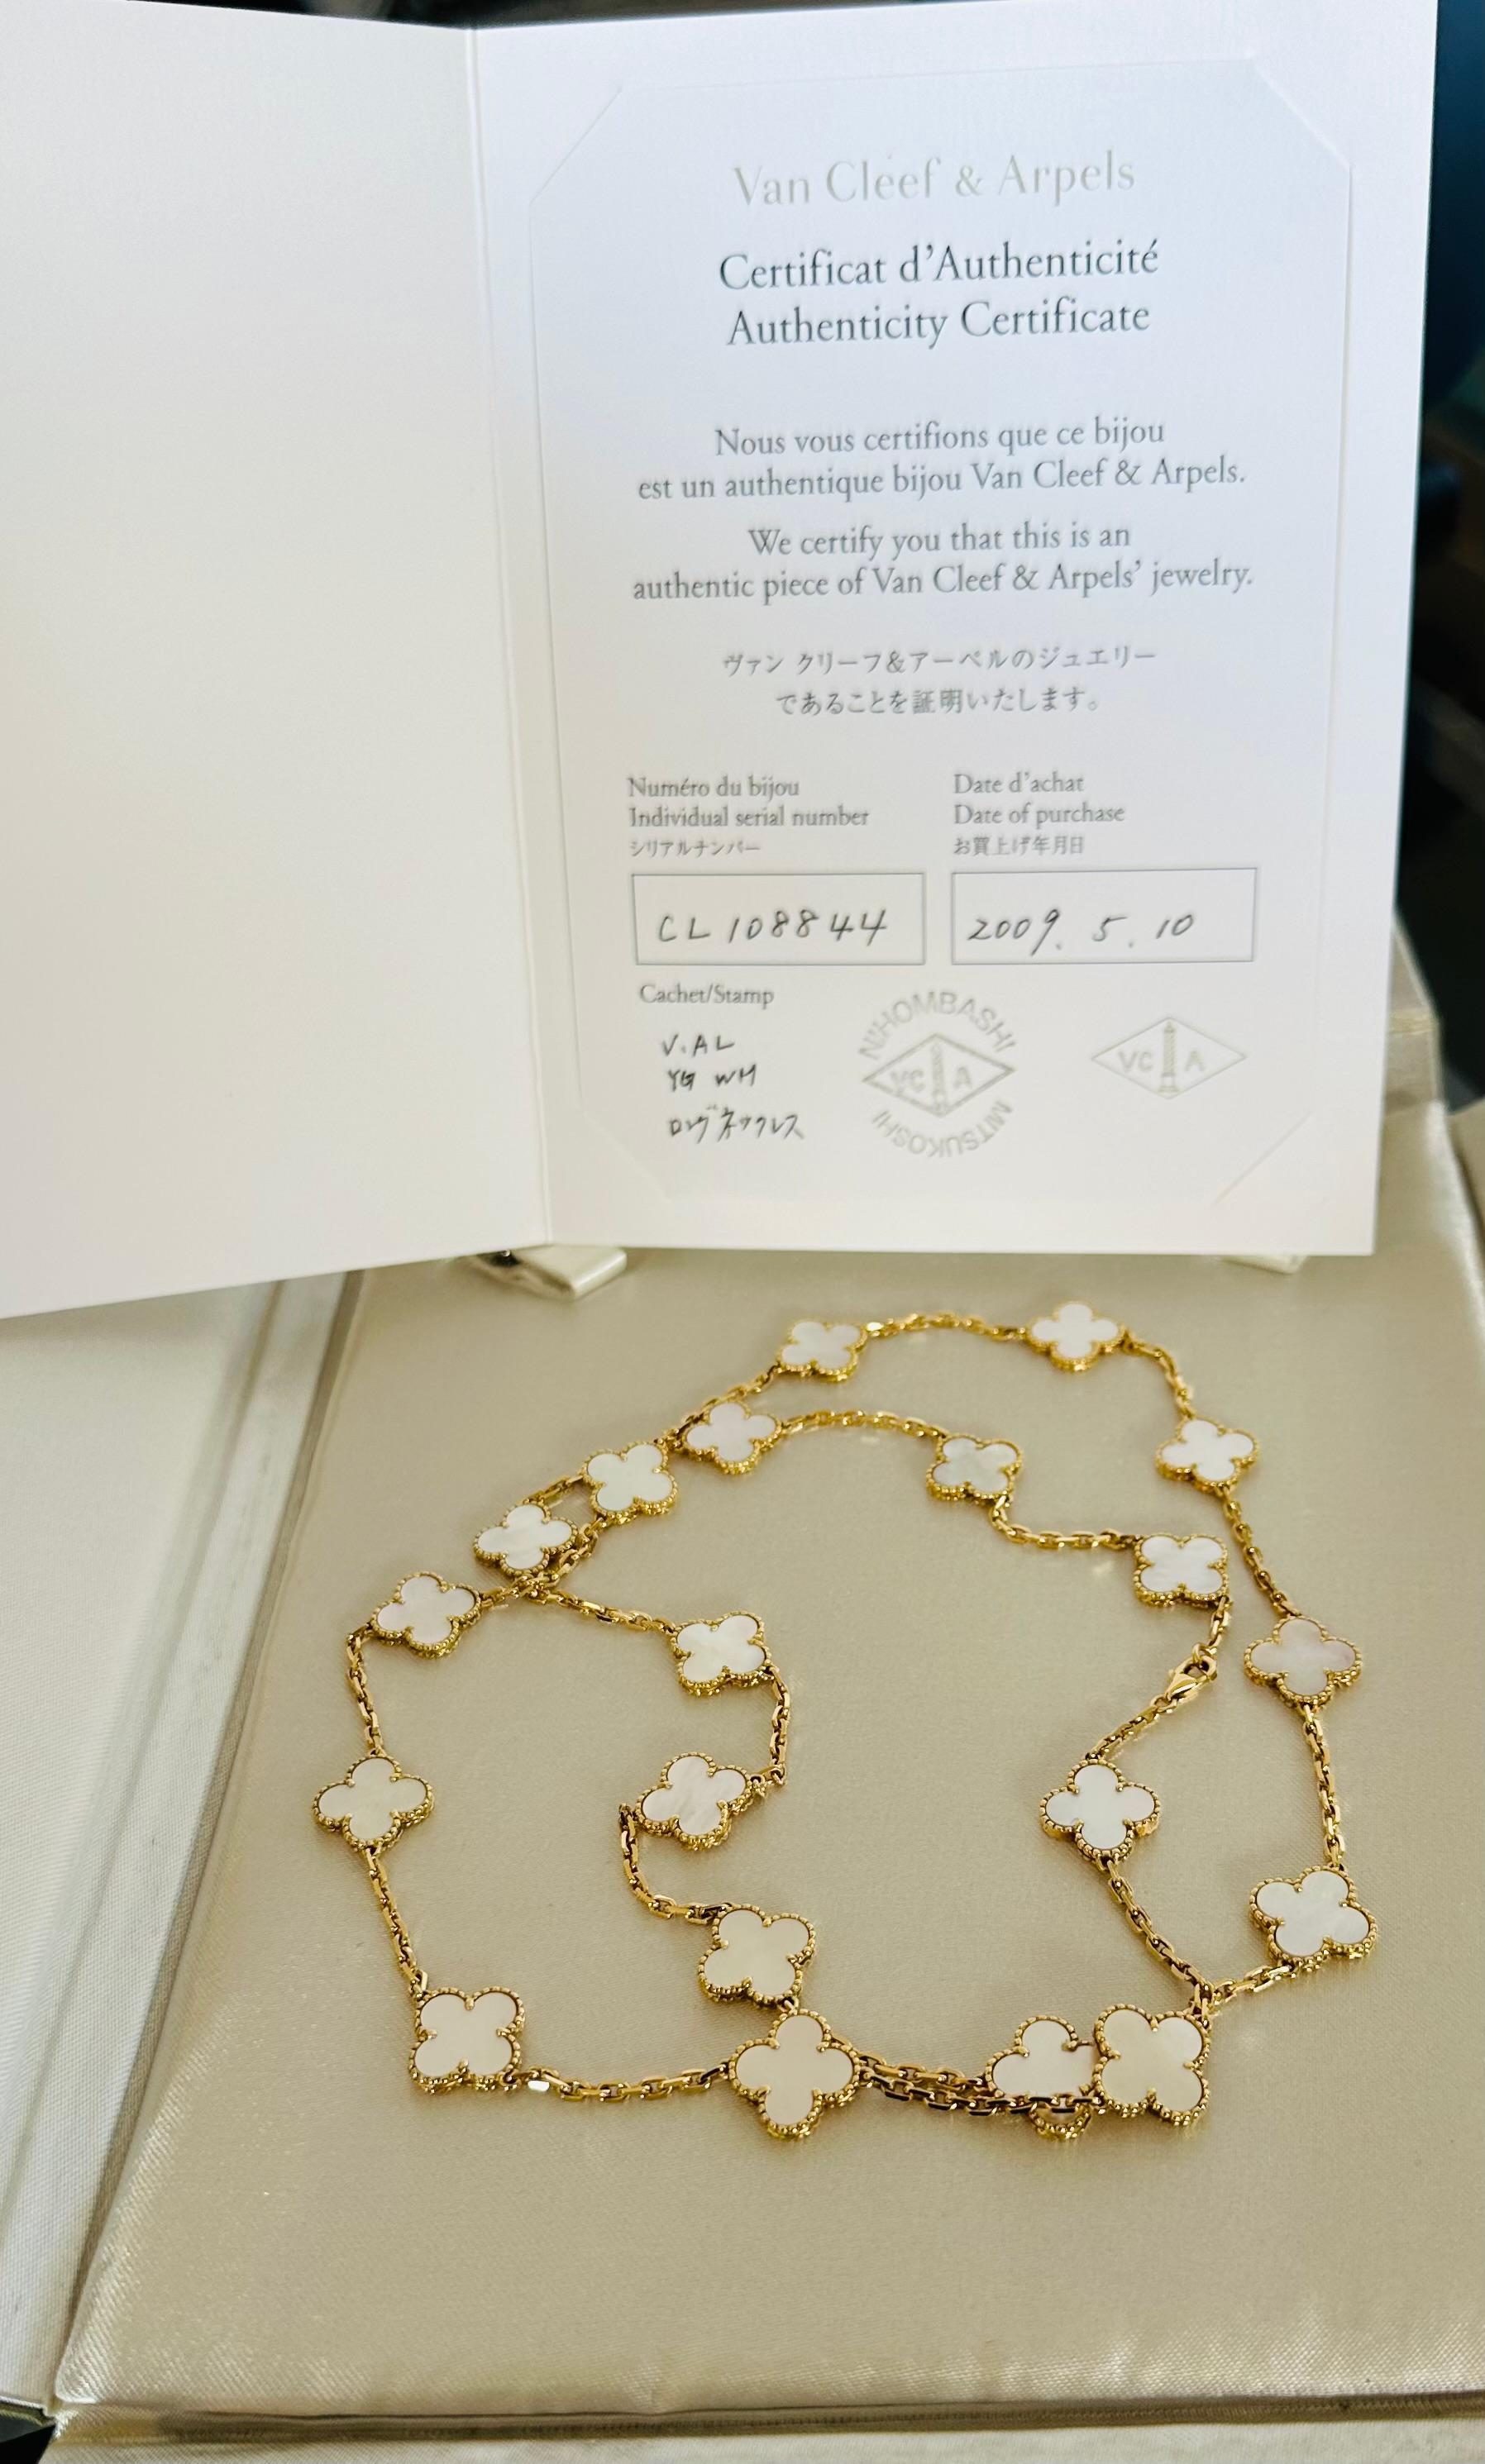 Van Cleef & Aperls 
The Vintage Alhambra Long Necklace , 20 Motifs Mother Of Pearl Along with the box and certificate of authenticity 2010. 
About Alhambra MOP Necklace:
the very first Alhambra® jewel created in 1968, the Vintage Alhambra creations